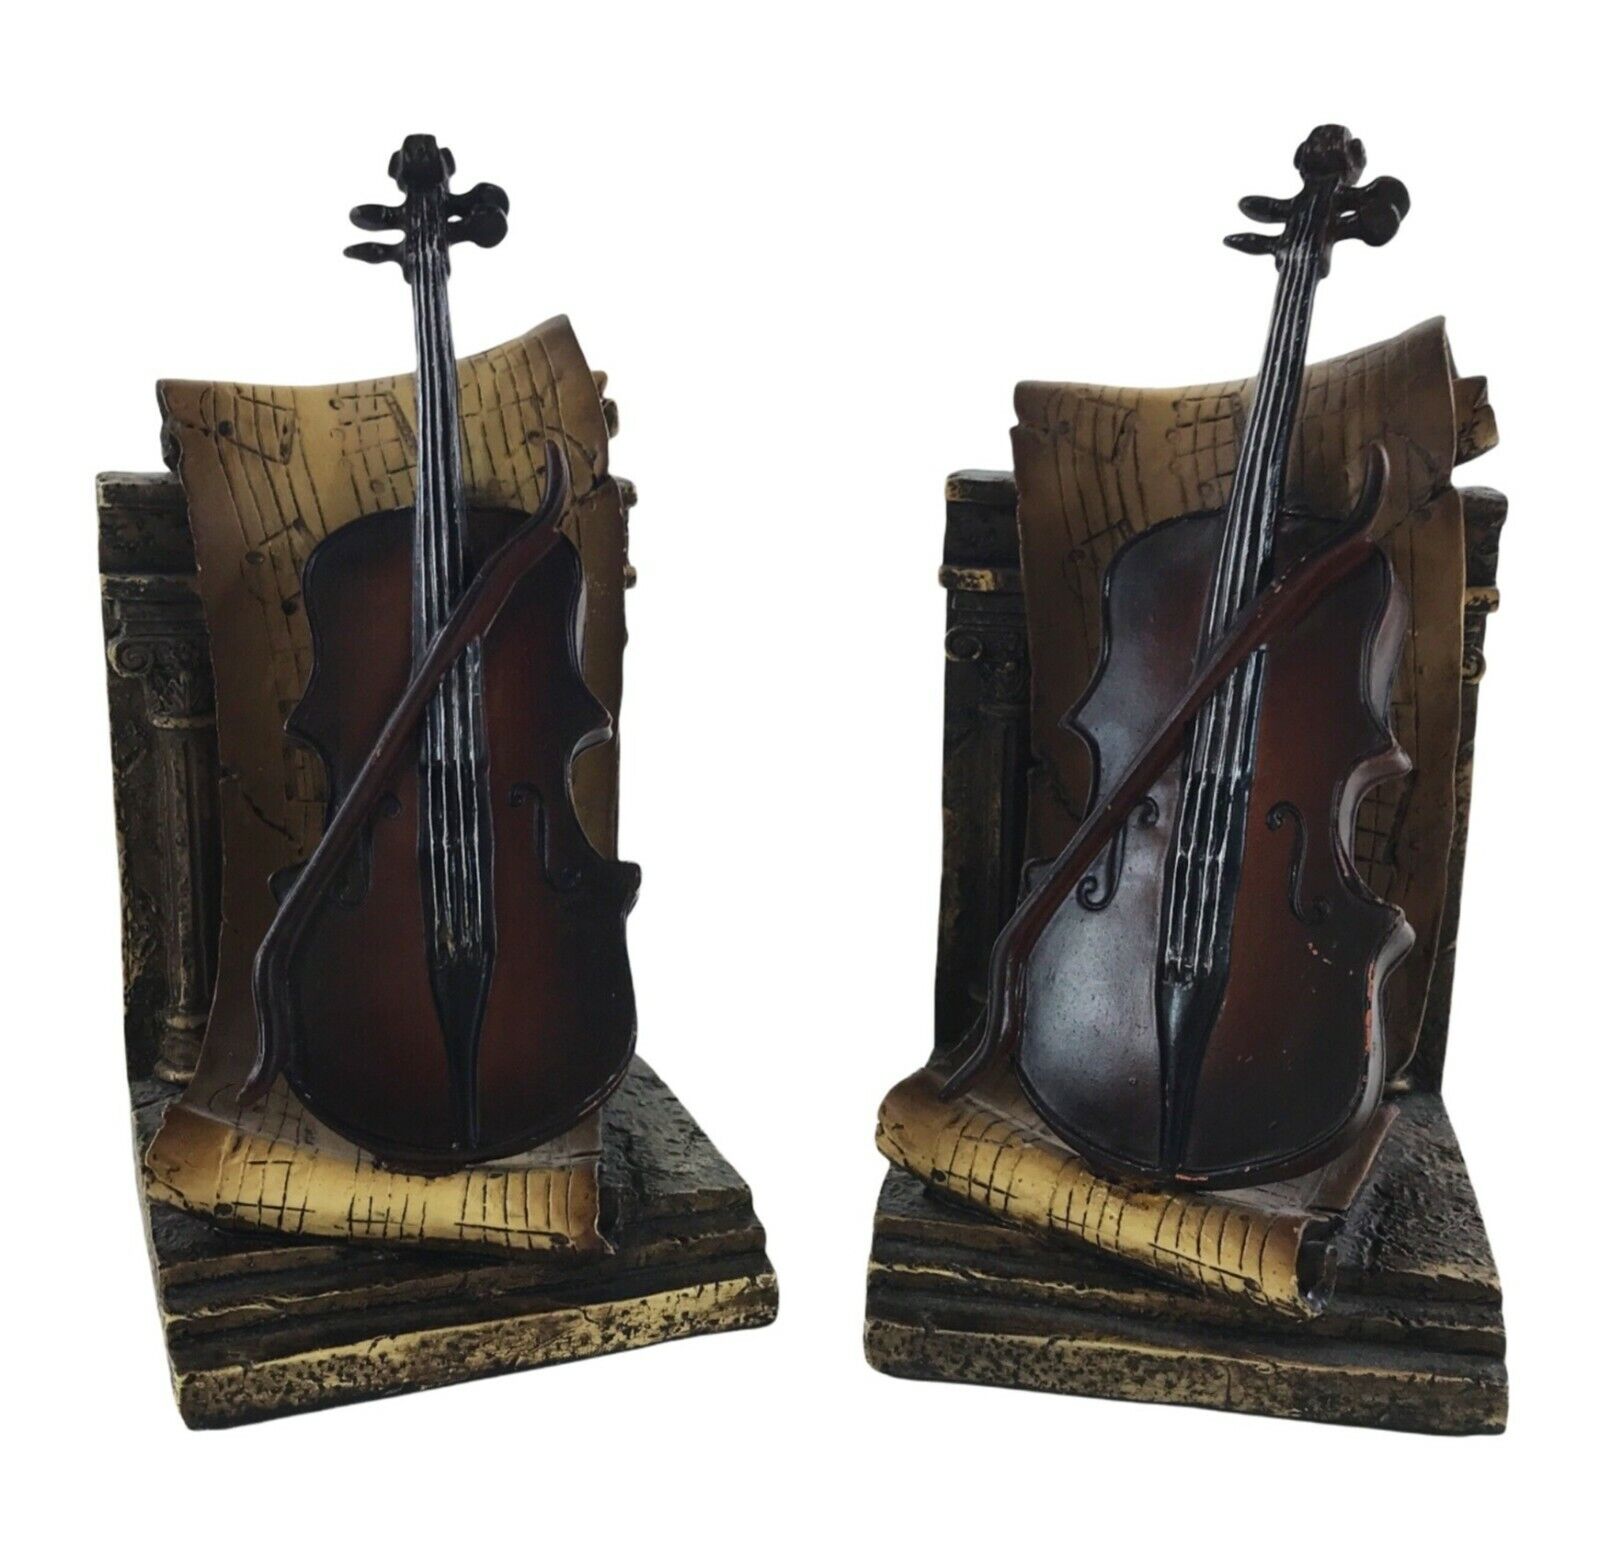 Bookends Vintage Violin Sheet Music Book Holders Sculpture Heavy 3.5 Pounds Each